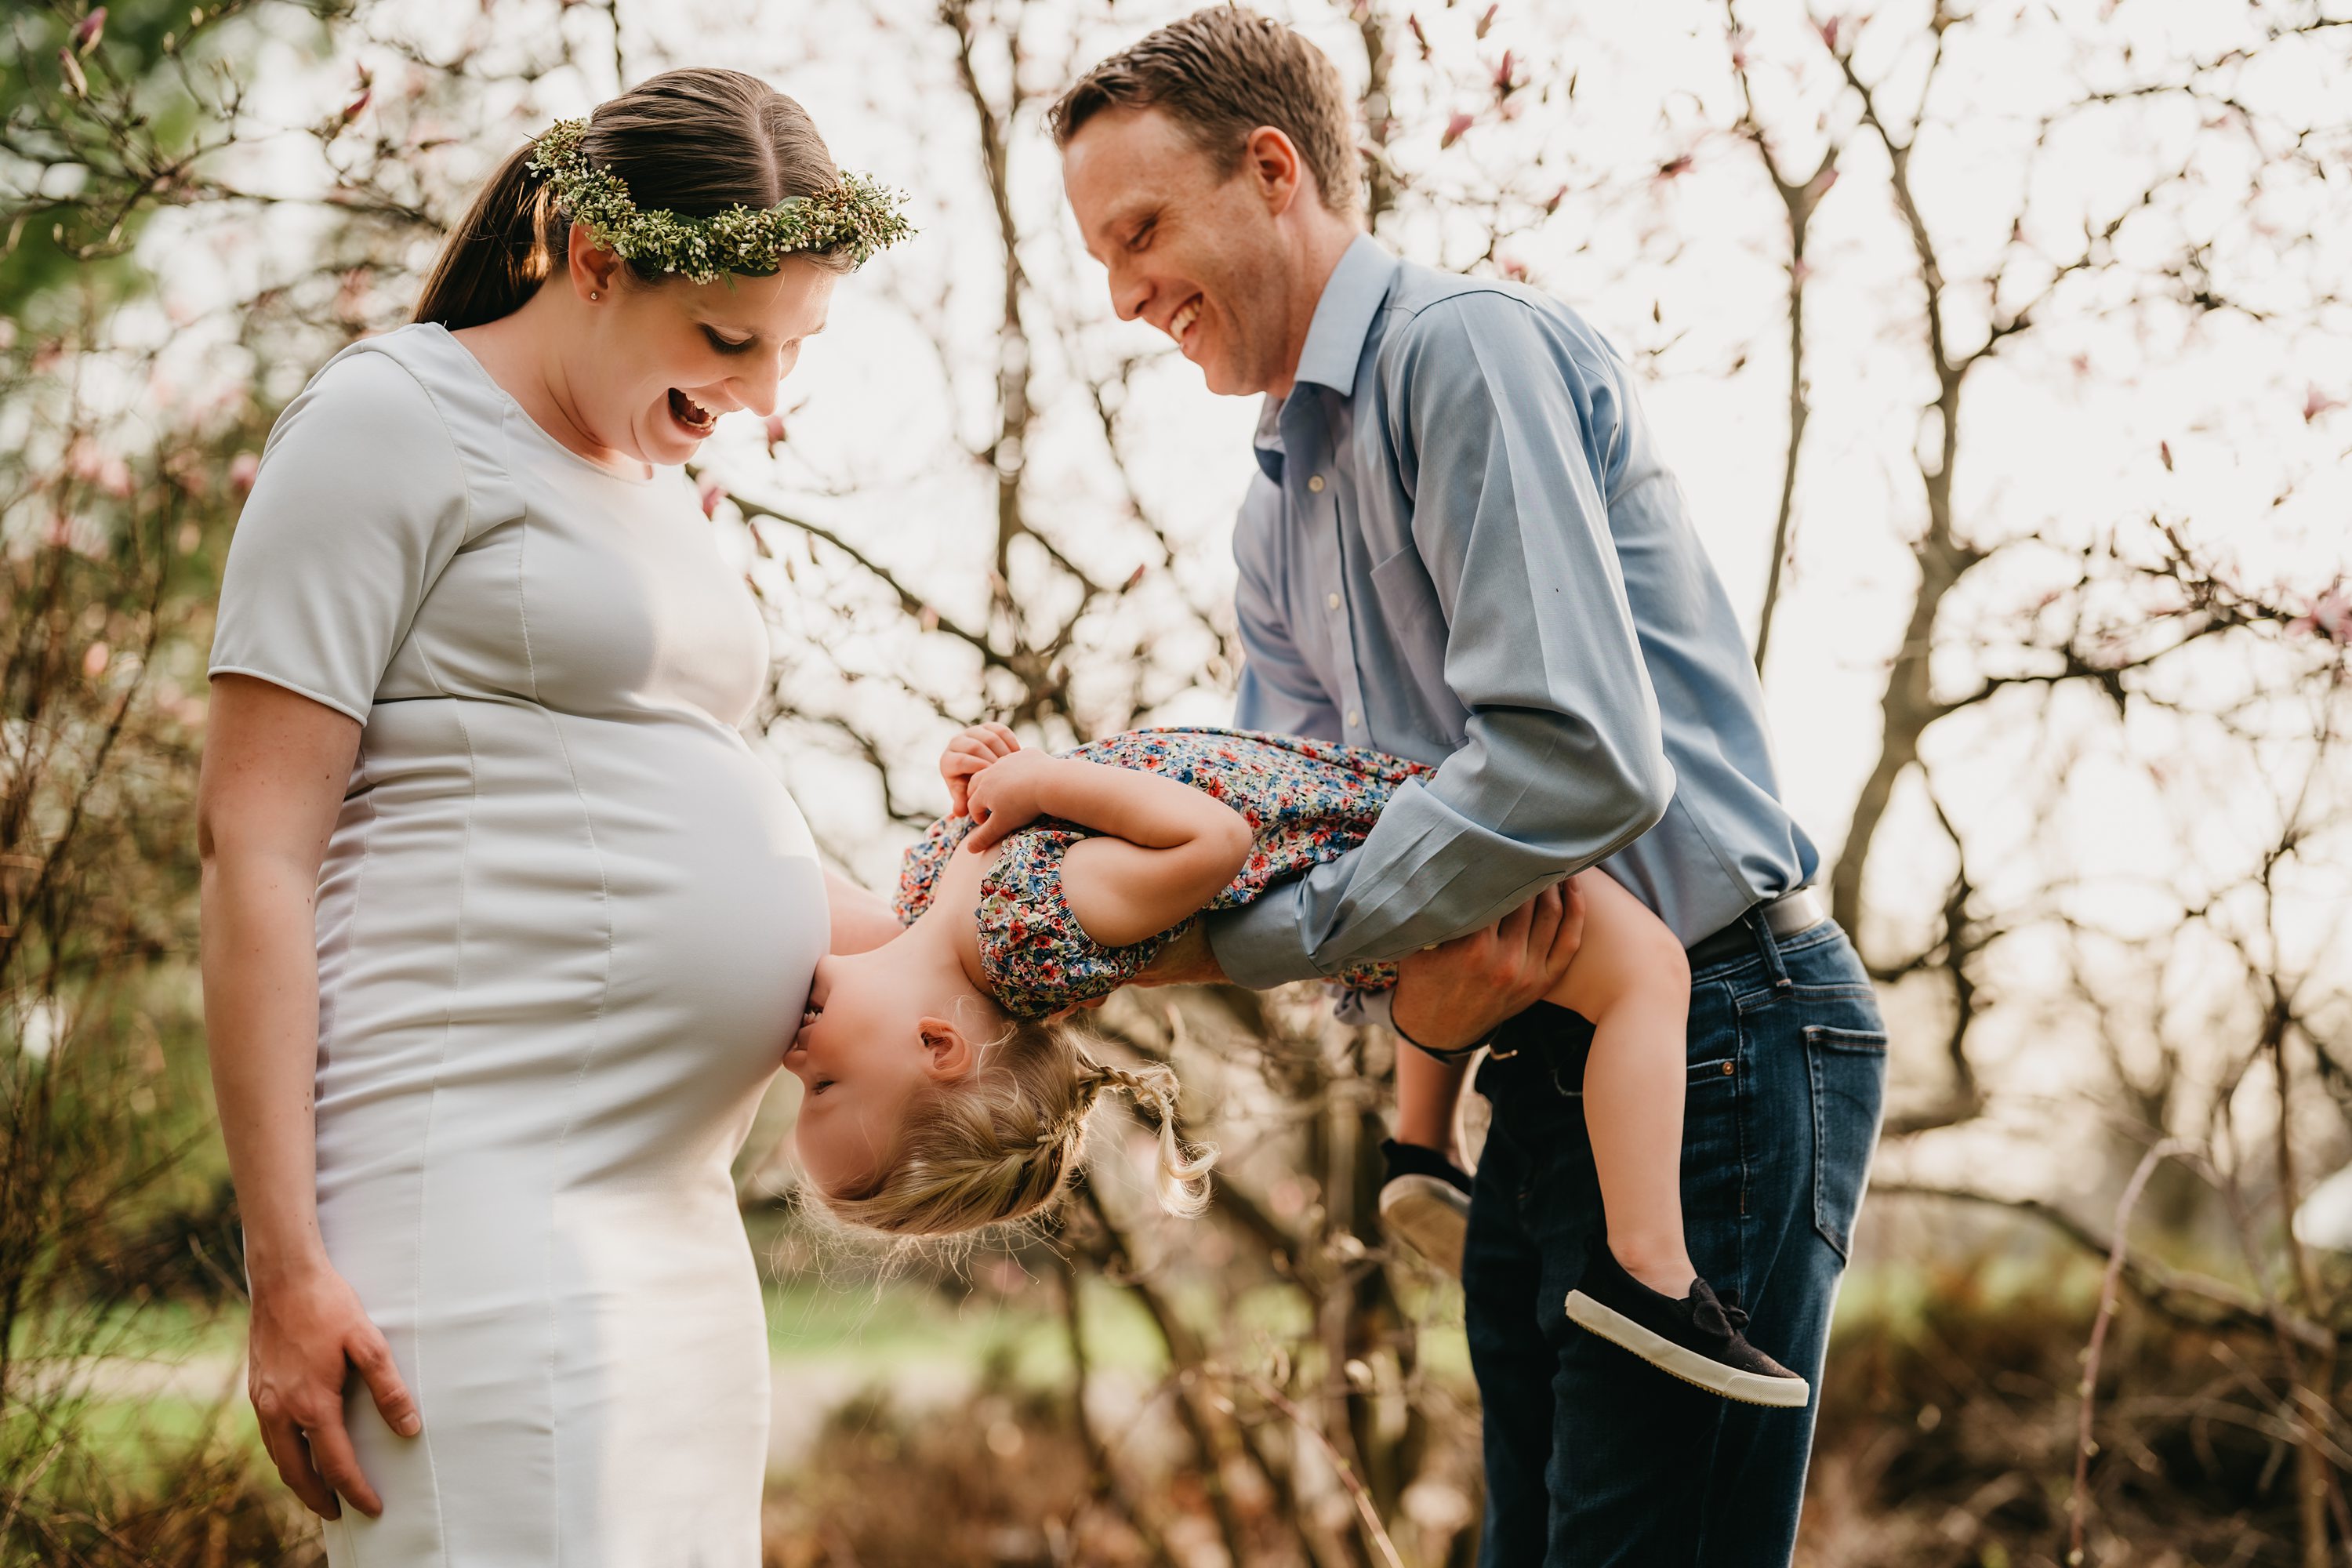 Springtime + Playtime: 3 tips for a maternity session with a toddler